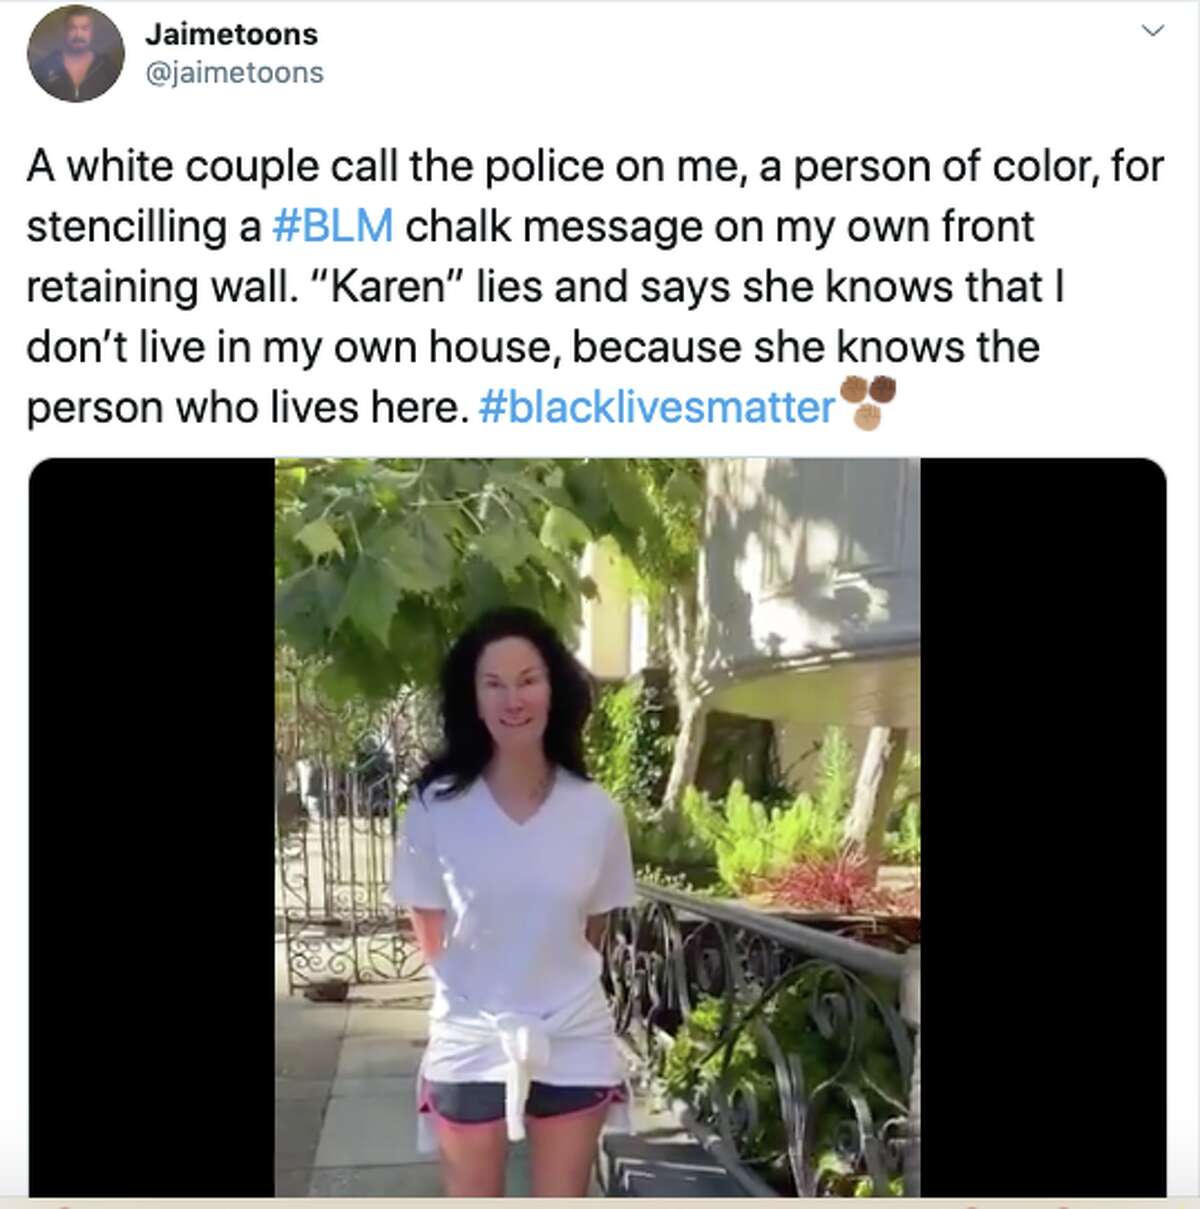 SF resident Lisa Alexander is under fire after a viral video shows her confronting a man over writing "Black Lives Matter" on his restraining wall.